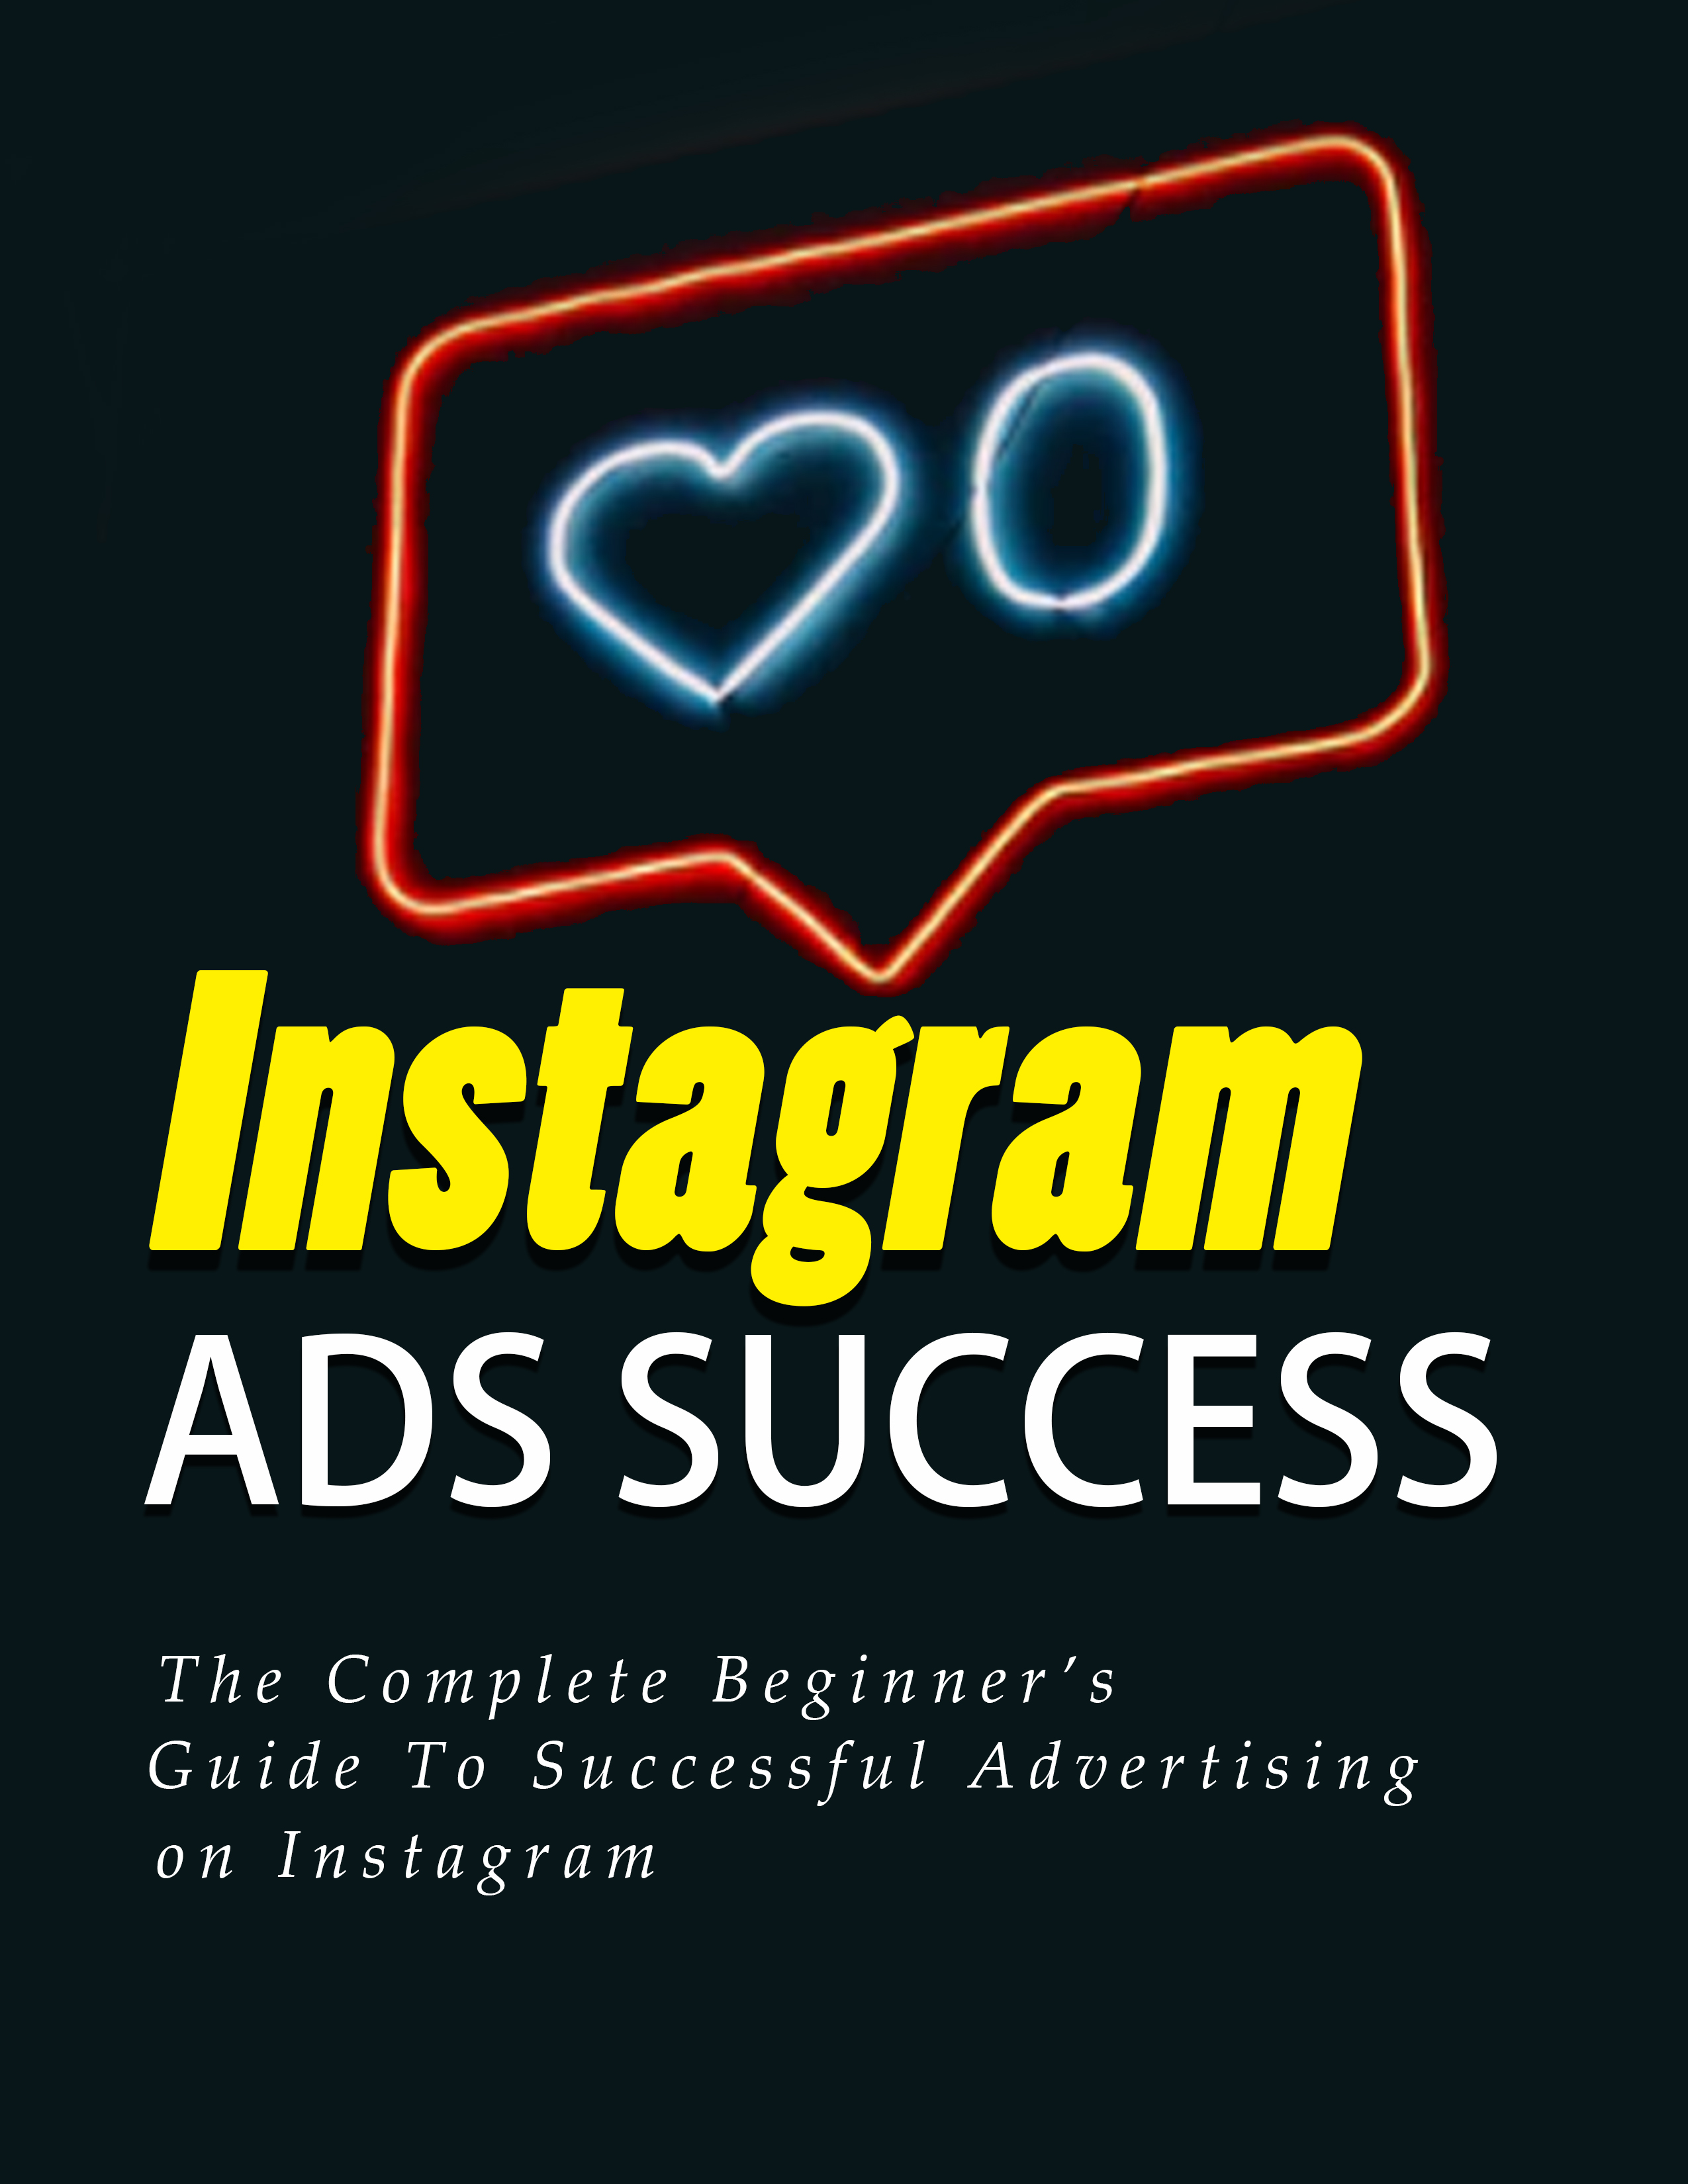 Instagram Ads Success (The Complete Beginner's Guide To Successful Advertising On Instagram) Ebook's Book Image